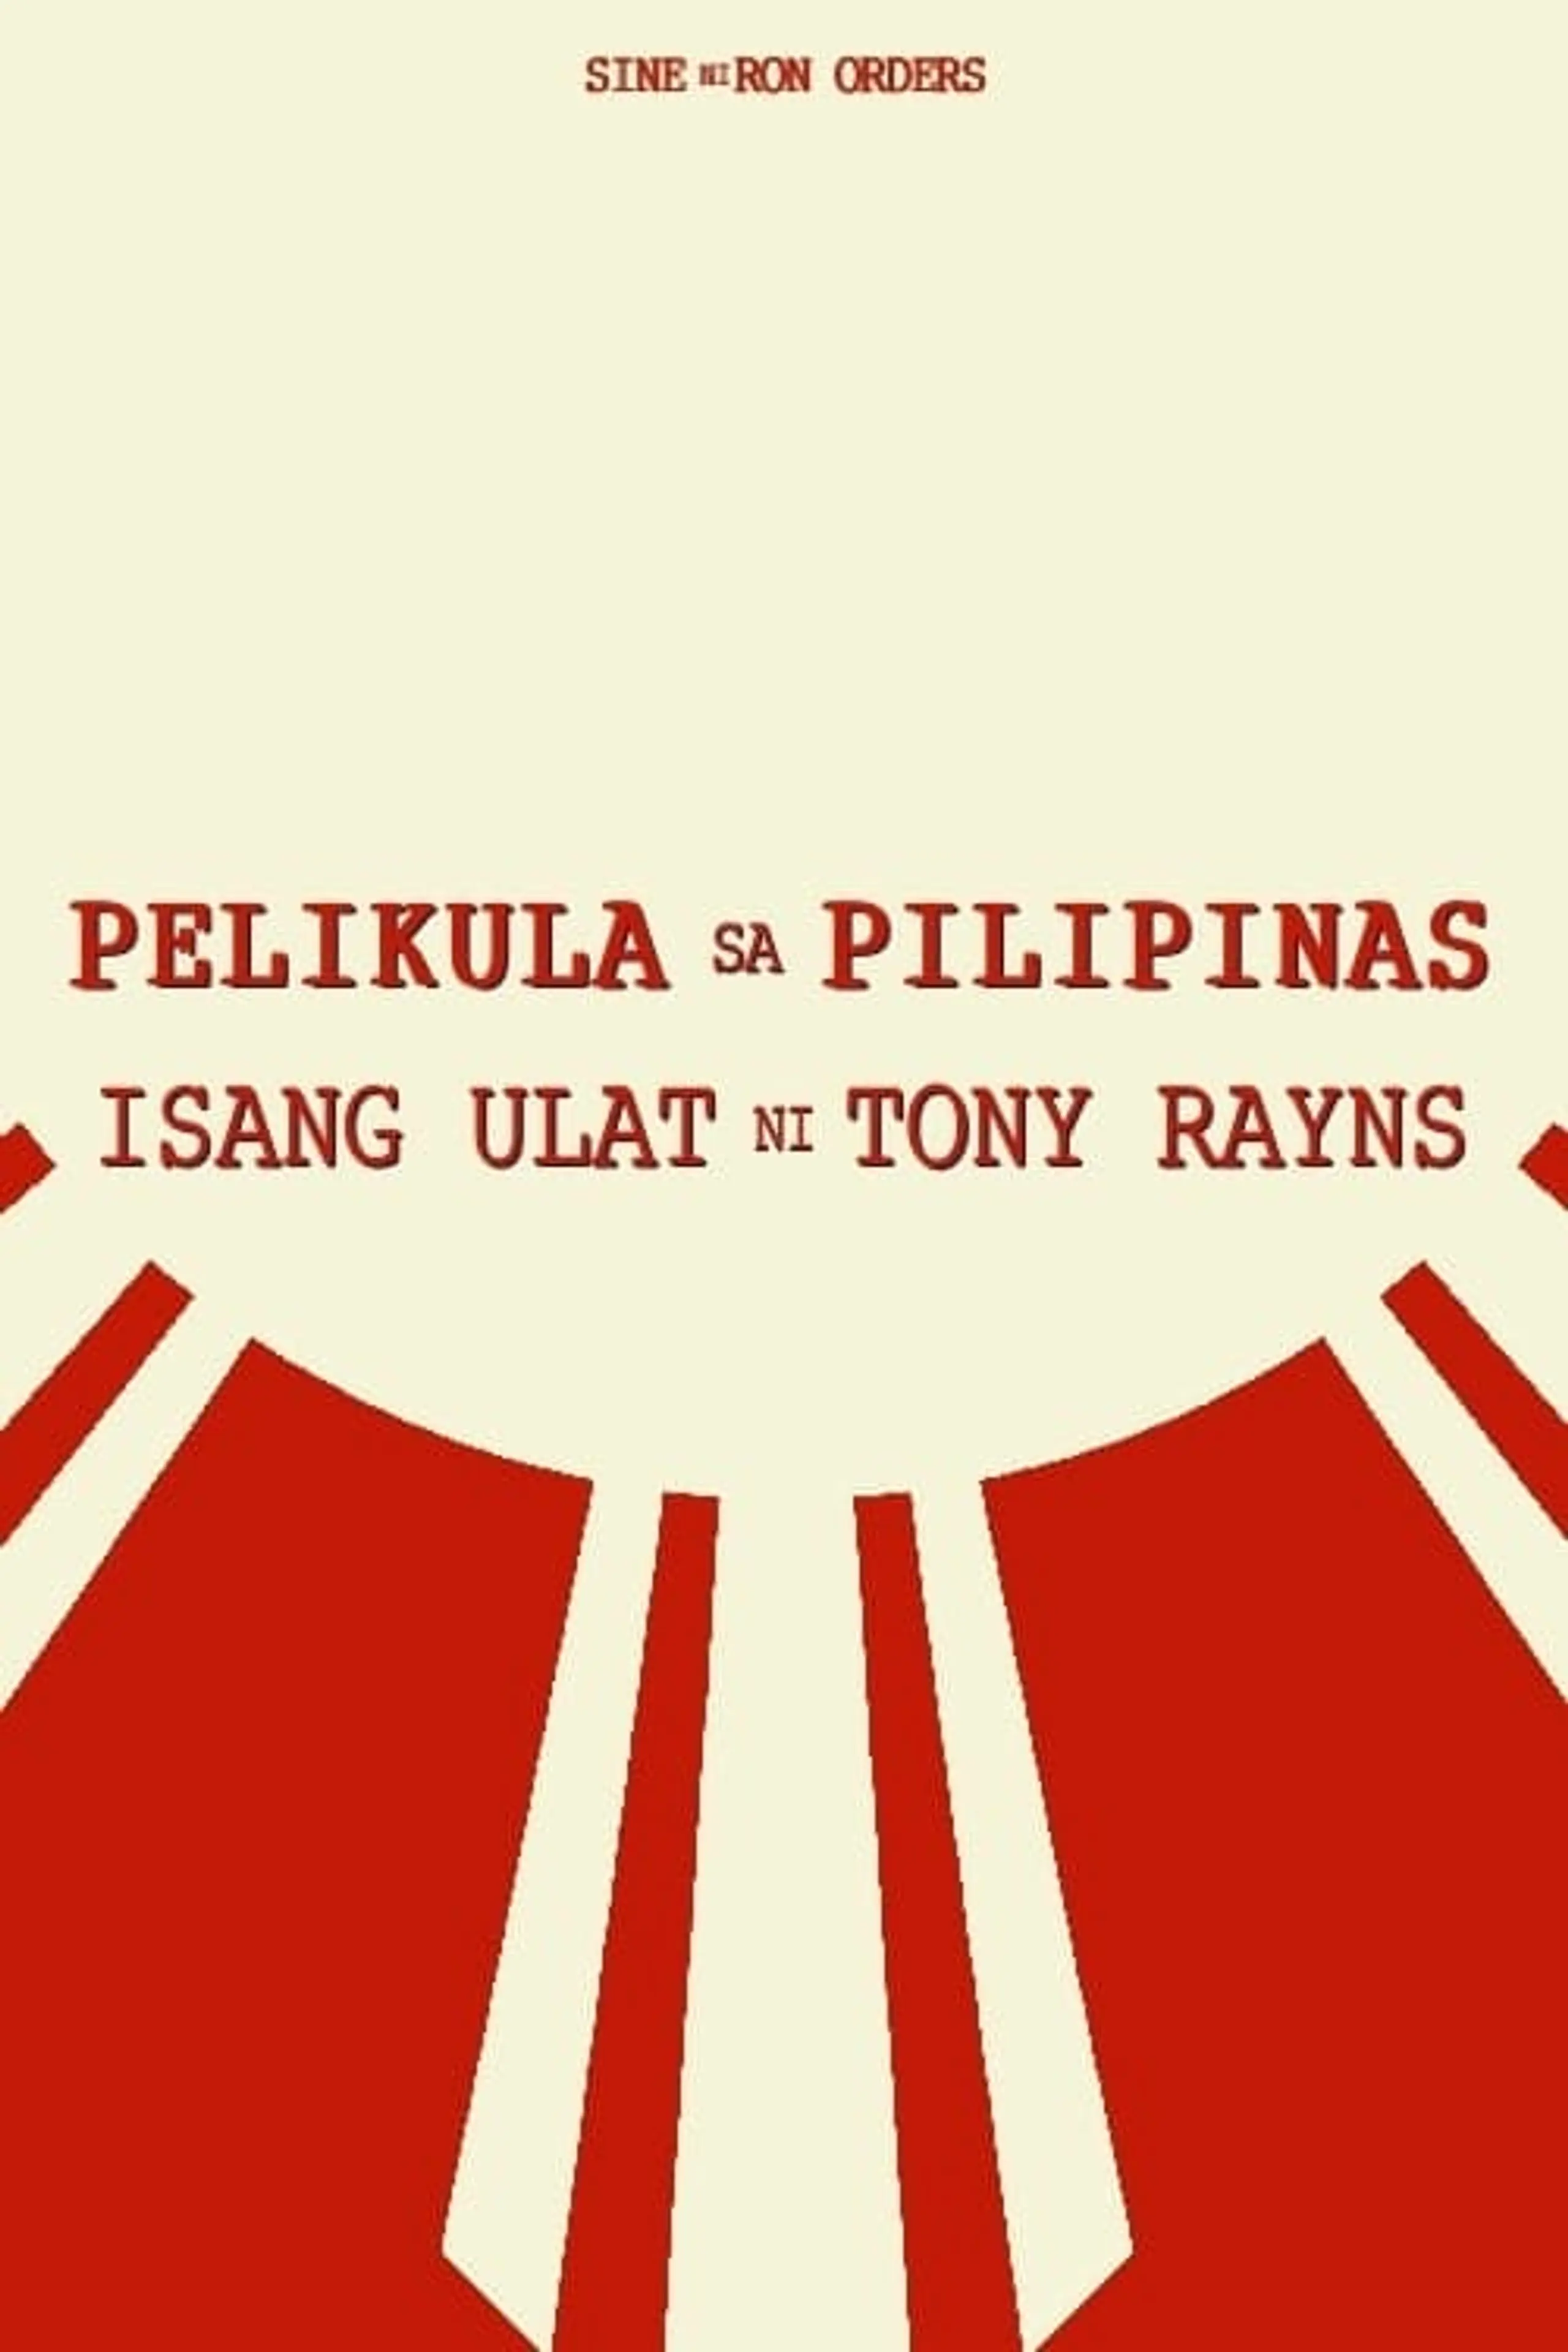 Visions Cinema: Film in the Philippines - A Report by Tony Rayns